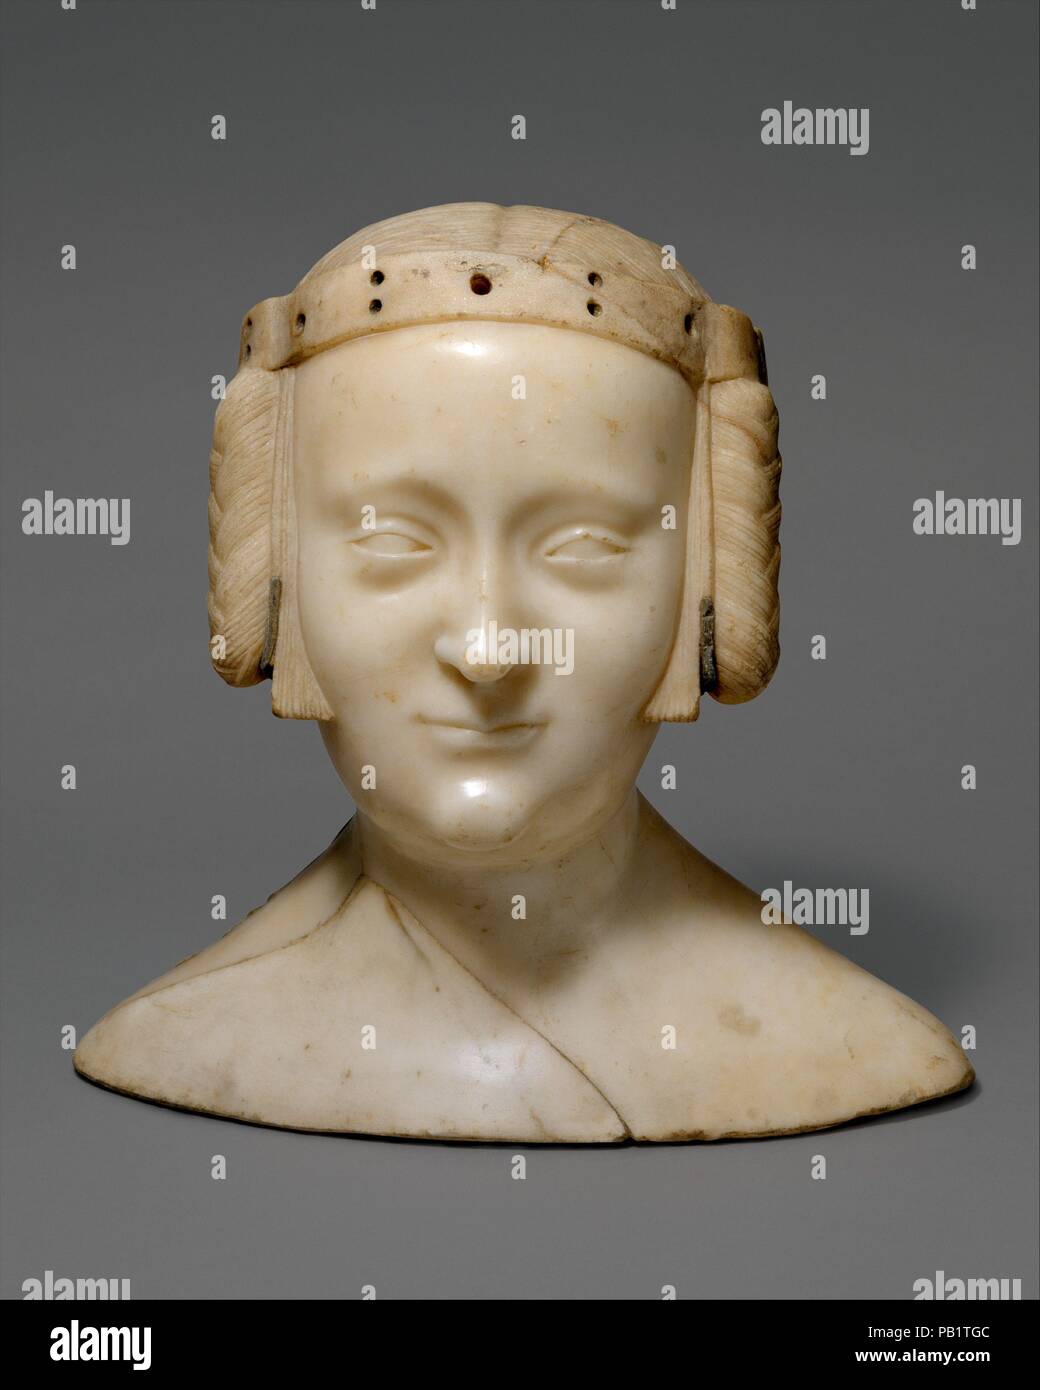 Tomb Effigy Bust of Marie de France (1327-41), daughter of Charles IV of France and Jeanne d'Evreux. Artist: Jean de Liège (Franco-Netherlandish, active ca. 1361-died 1381). Culture: French. Dimensions: Overall (without base): 12 1/4 x 12 3/4 x 6 3/16 in. (31.1 x 32.4 x 15.7 cm). Date: ca. 1381.  The Royal Abbey of Saint-Denis was the burial church for the rulers of France and their families. This elegant image once formed a part of the tomb effigy of the princess Marie de France (1326-1341) and her sister Blanche de France (1328-1393), daughters of Charles IV (1294-1328) and Jeanne d'Evreux ( Stock Photo